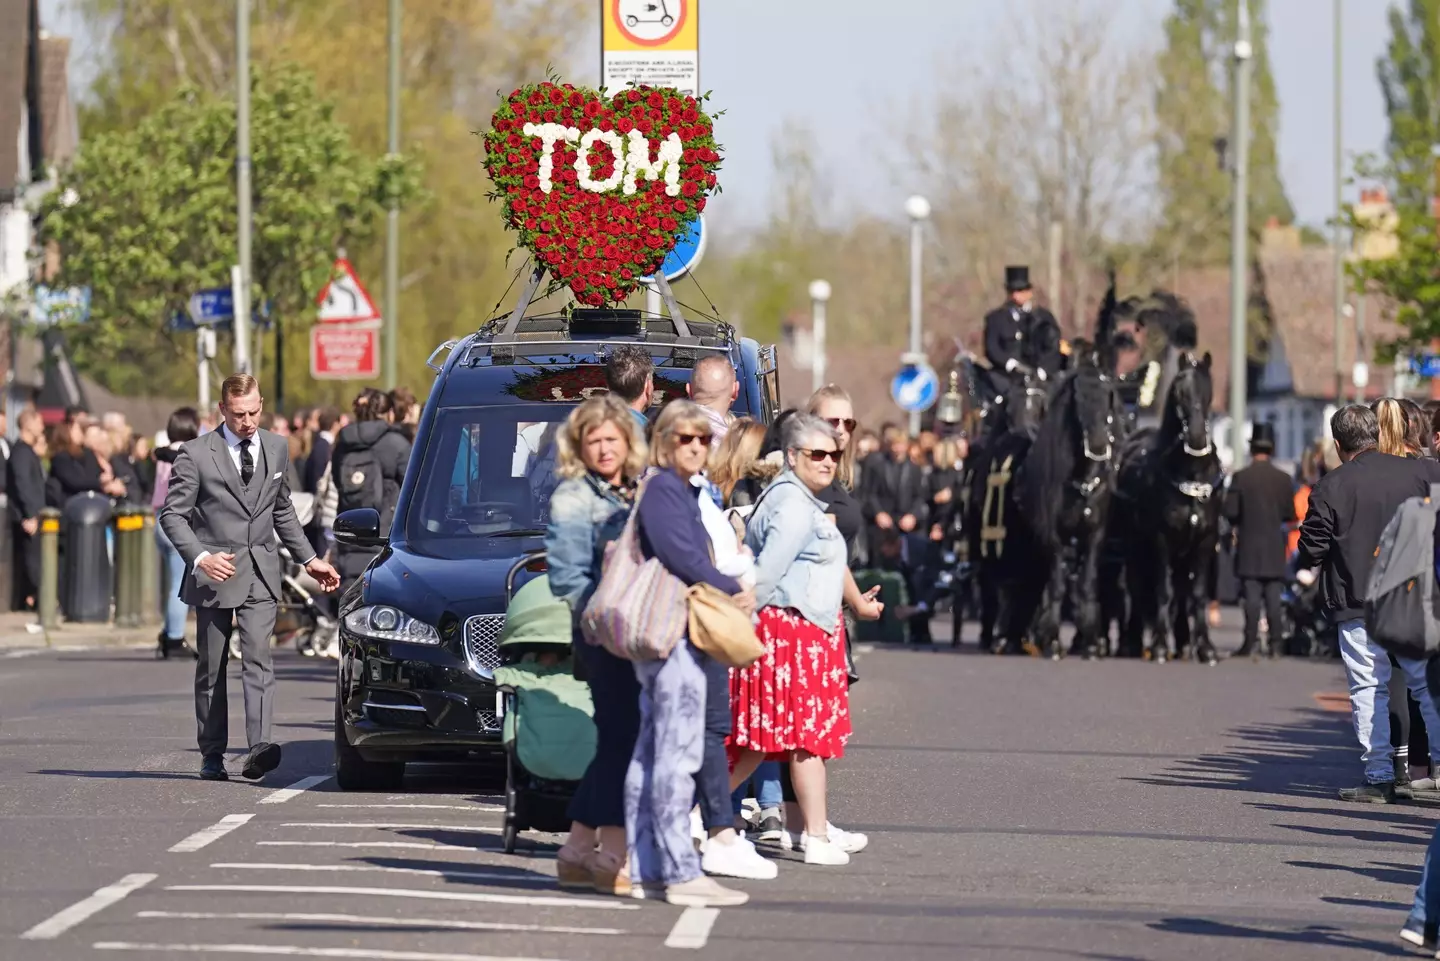 A hearse ahead of the funeral of The Wanted star Tom Parker (